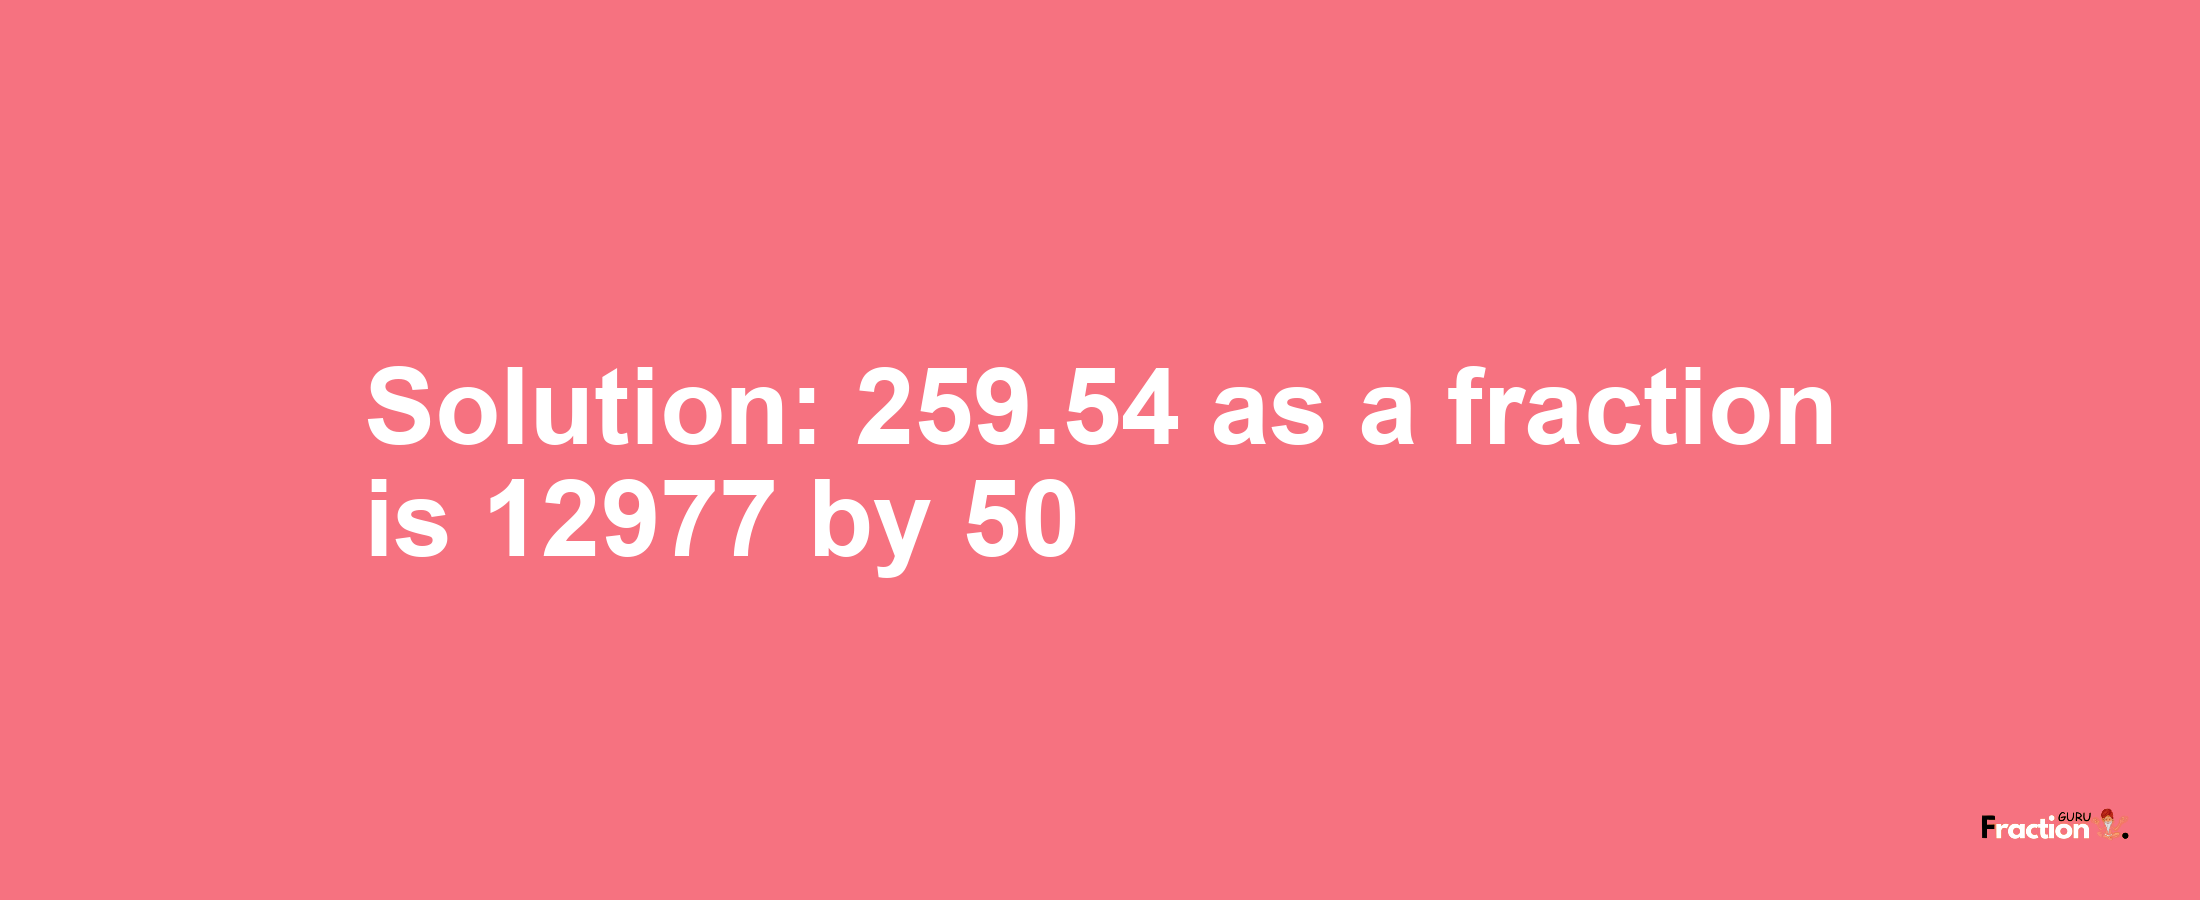 Solution:259.54 as a fraction is 12977/50